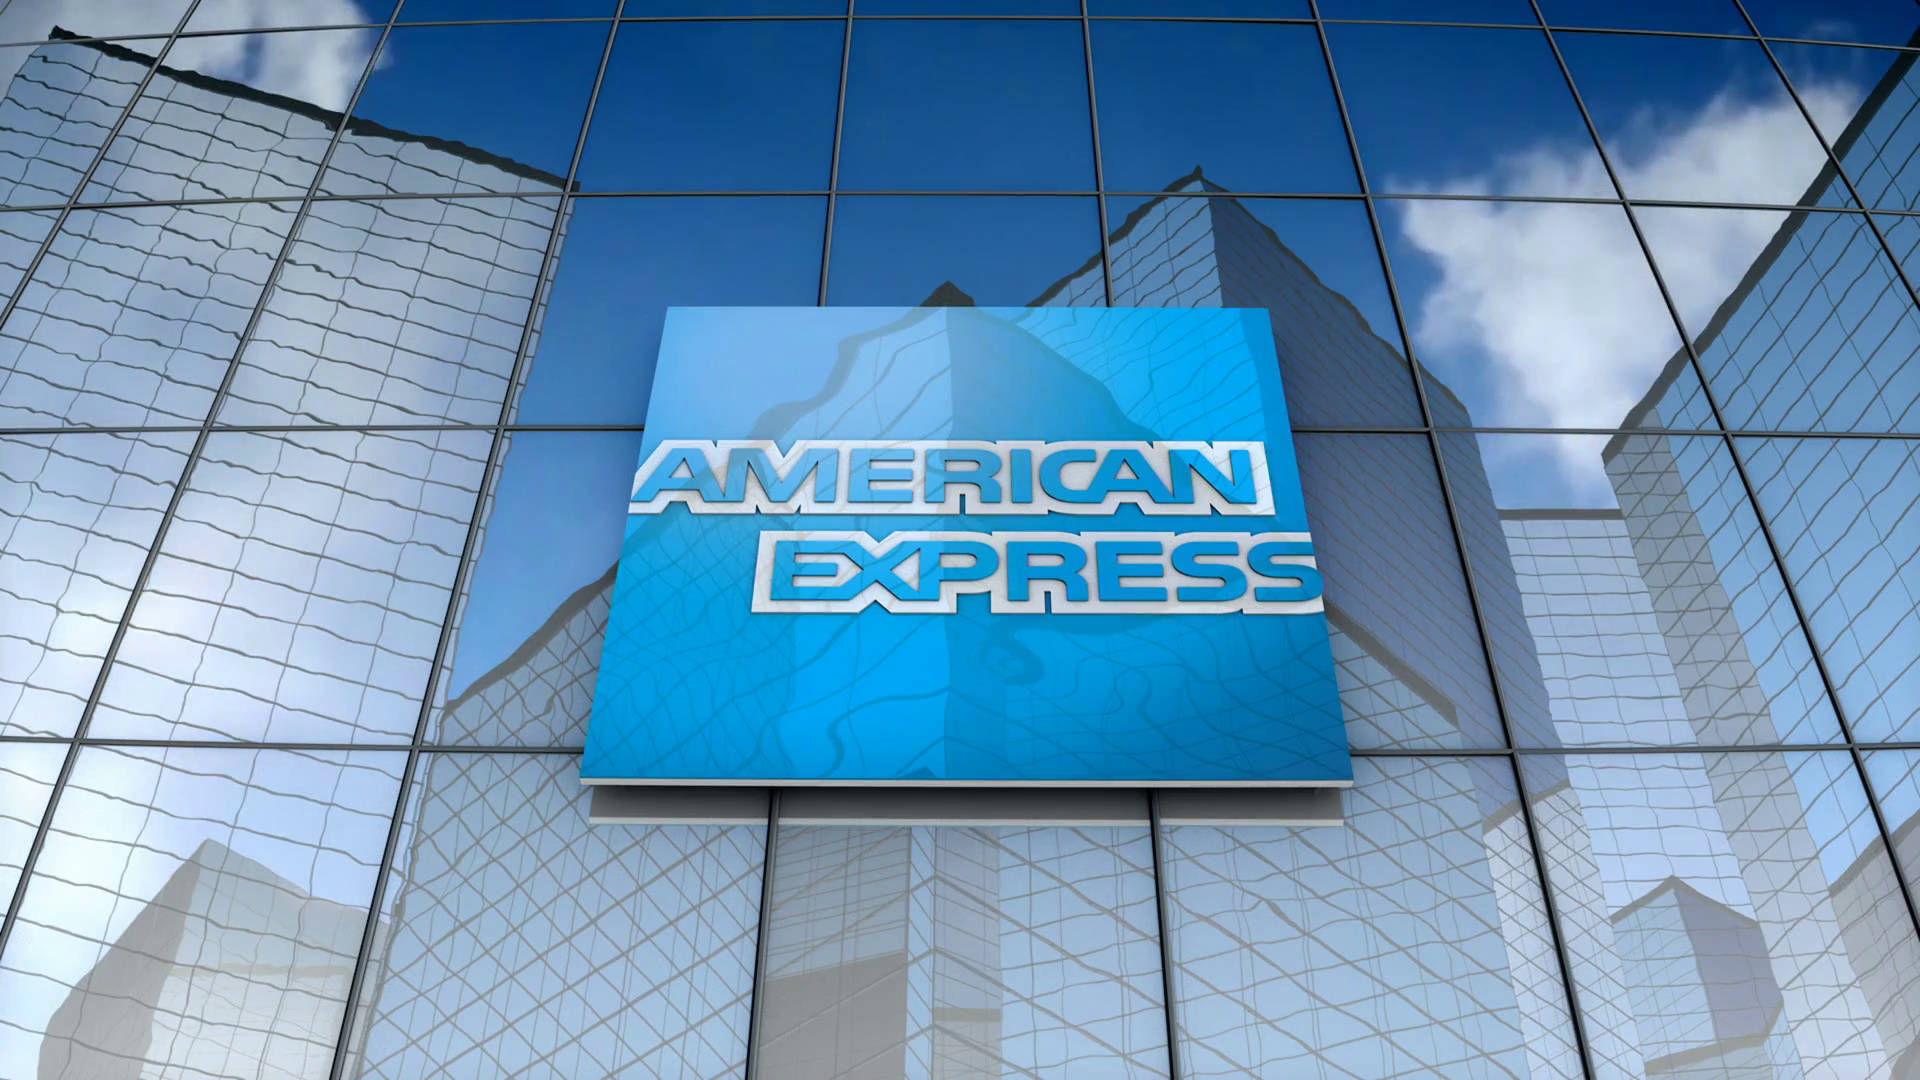 American Express Blue City Signage Wallpaper